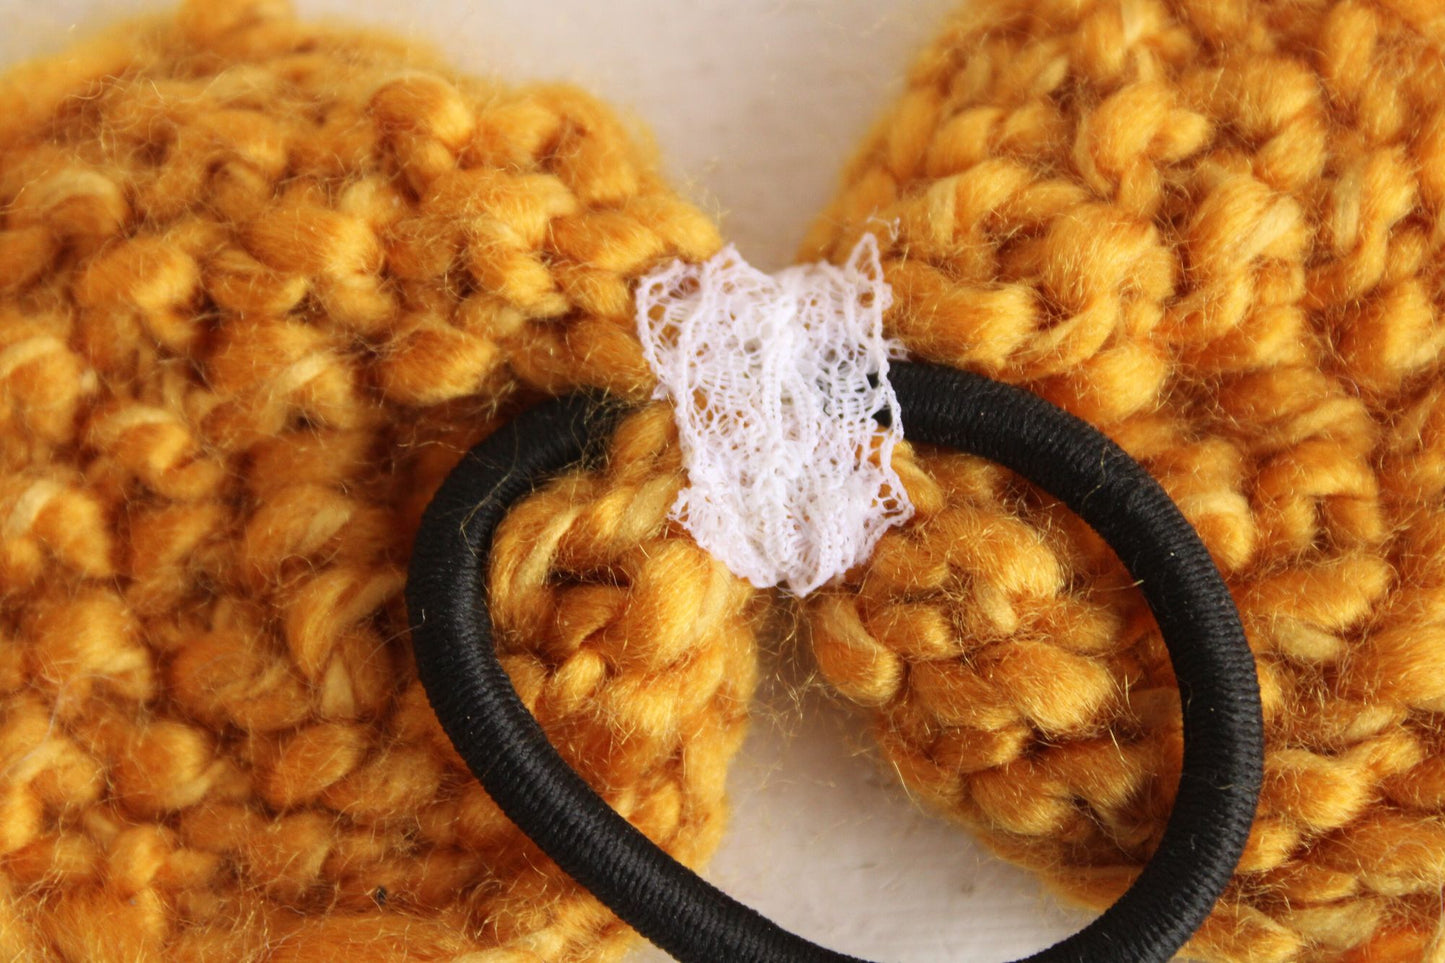 "Candlelight" Handknitted Golden Yellow Hair Bow with Vintage Lace Trim